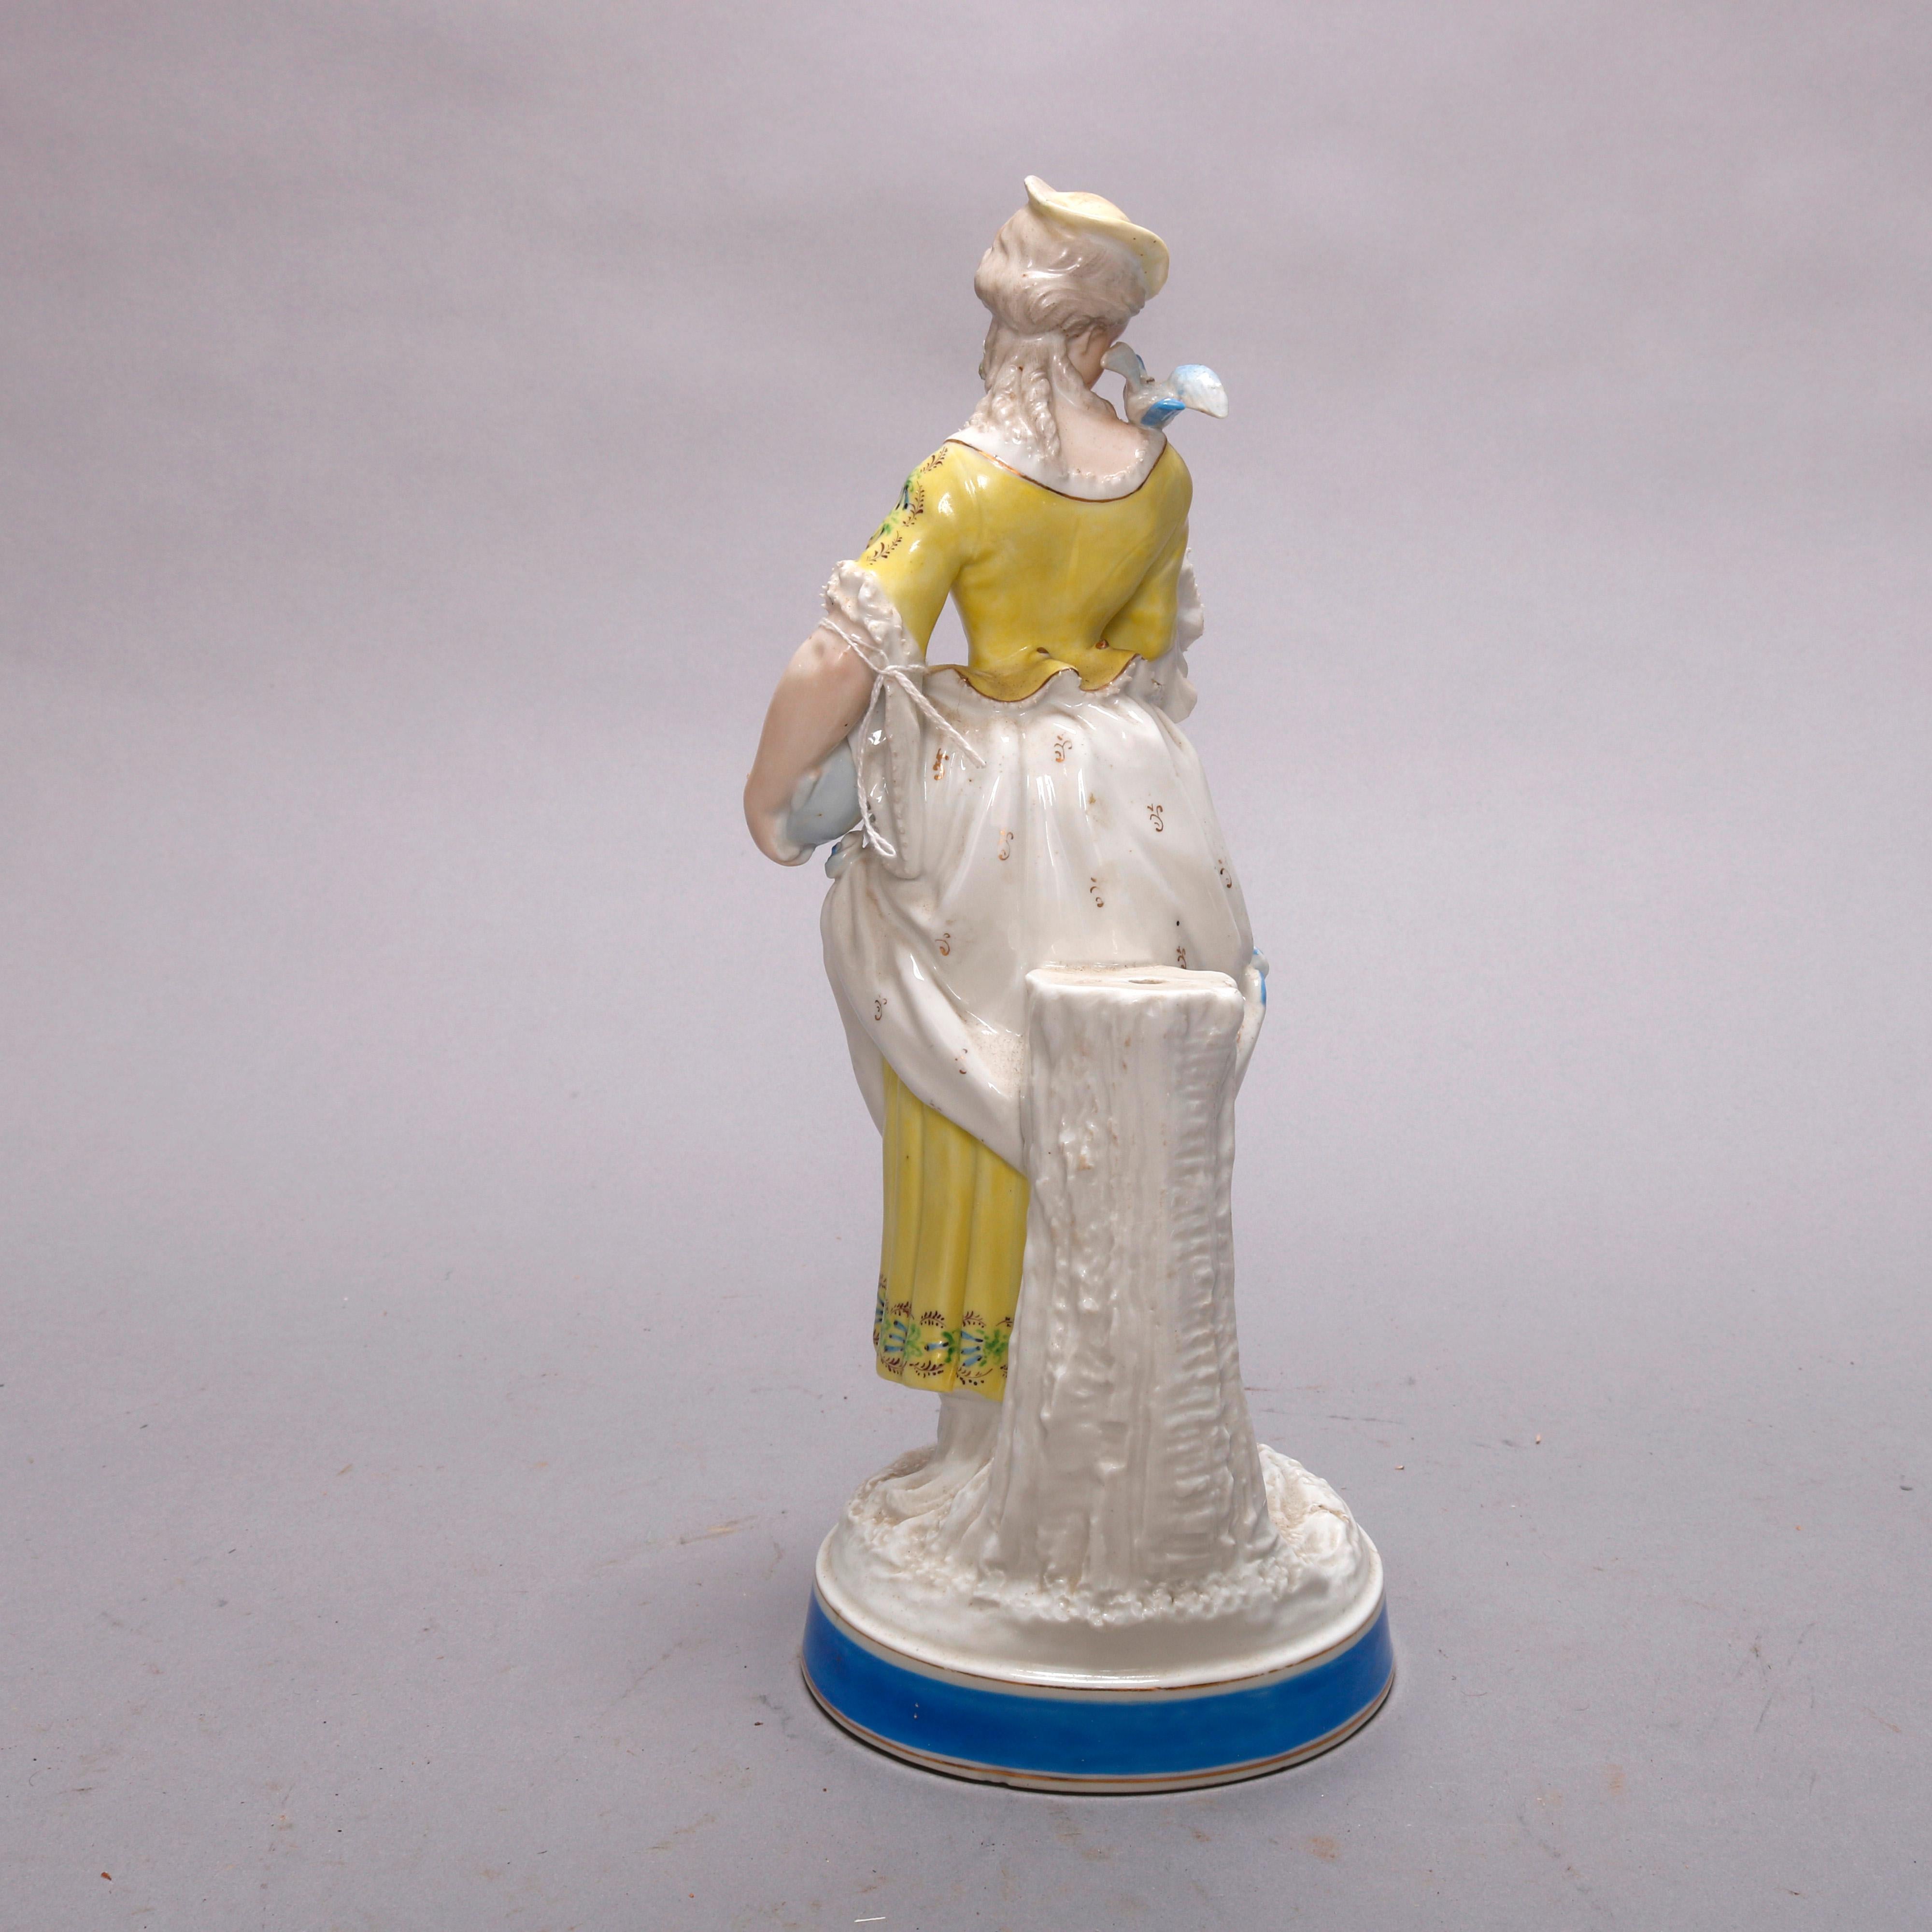 Hand-Painted Antique German Hand Painted Porcelain Maiden Figure, Manner of Meissen, c1900 For Sale